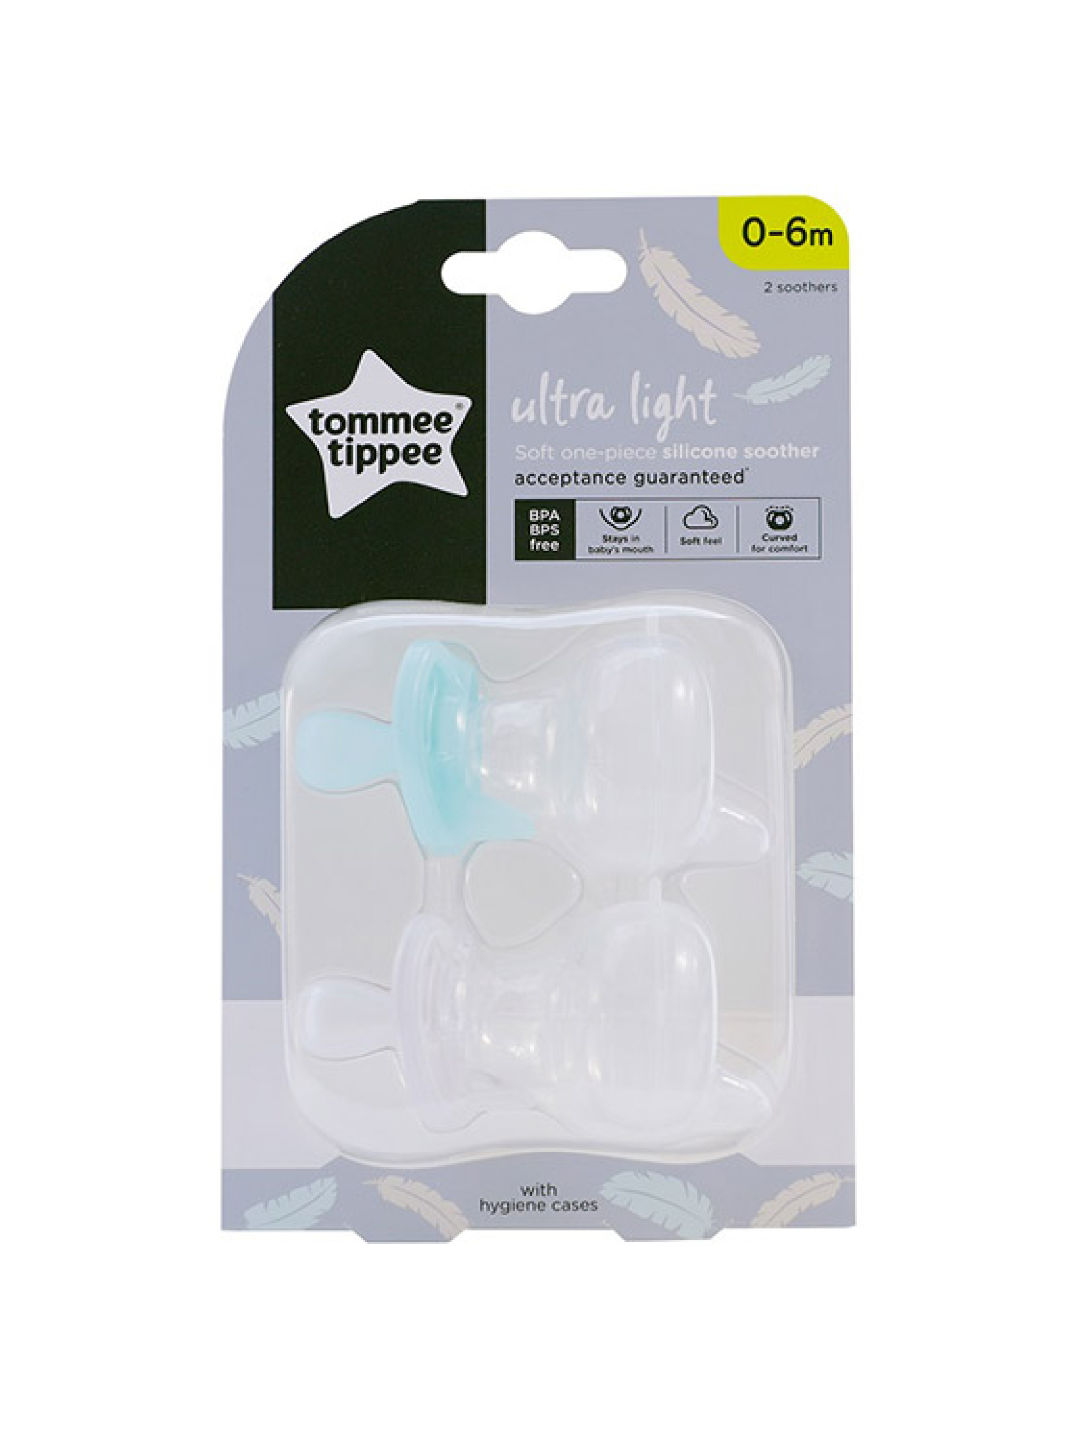 Tommee Tippee Soft-one Piece Silicone Soother 0-6m (Pack of 2)